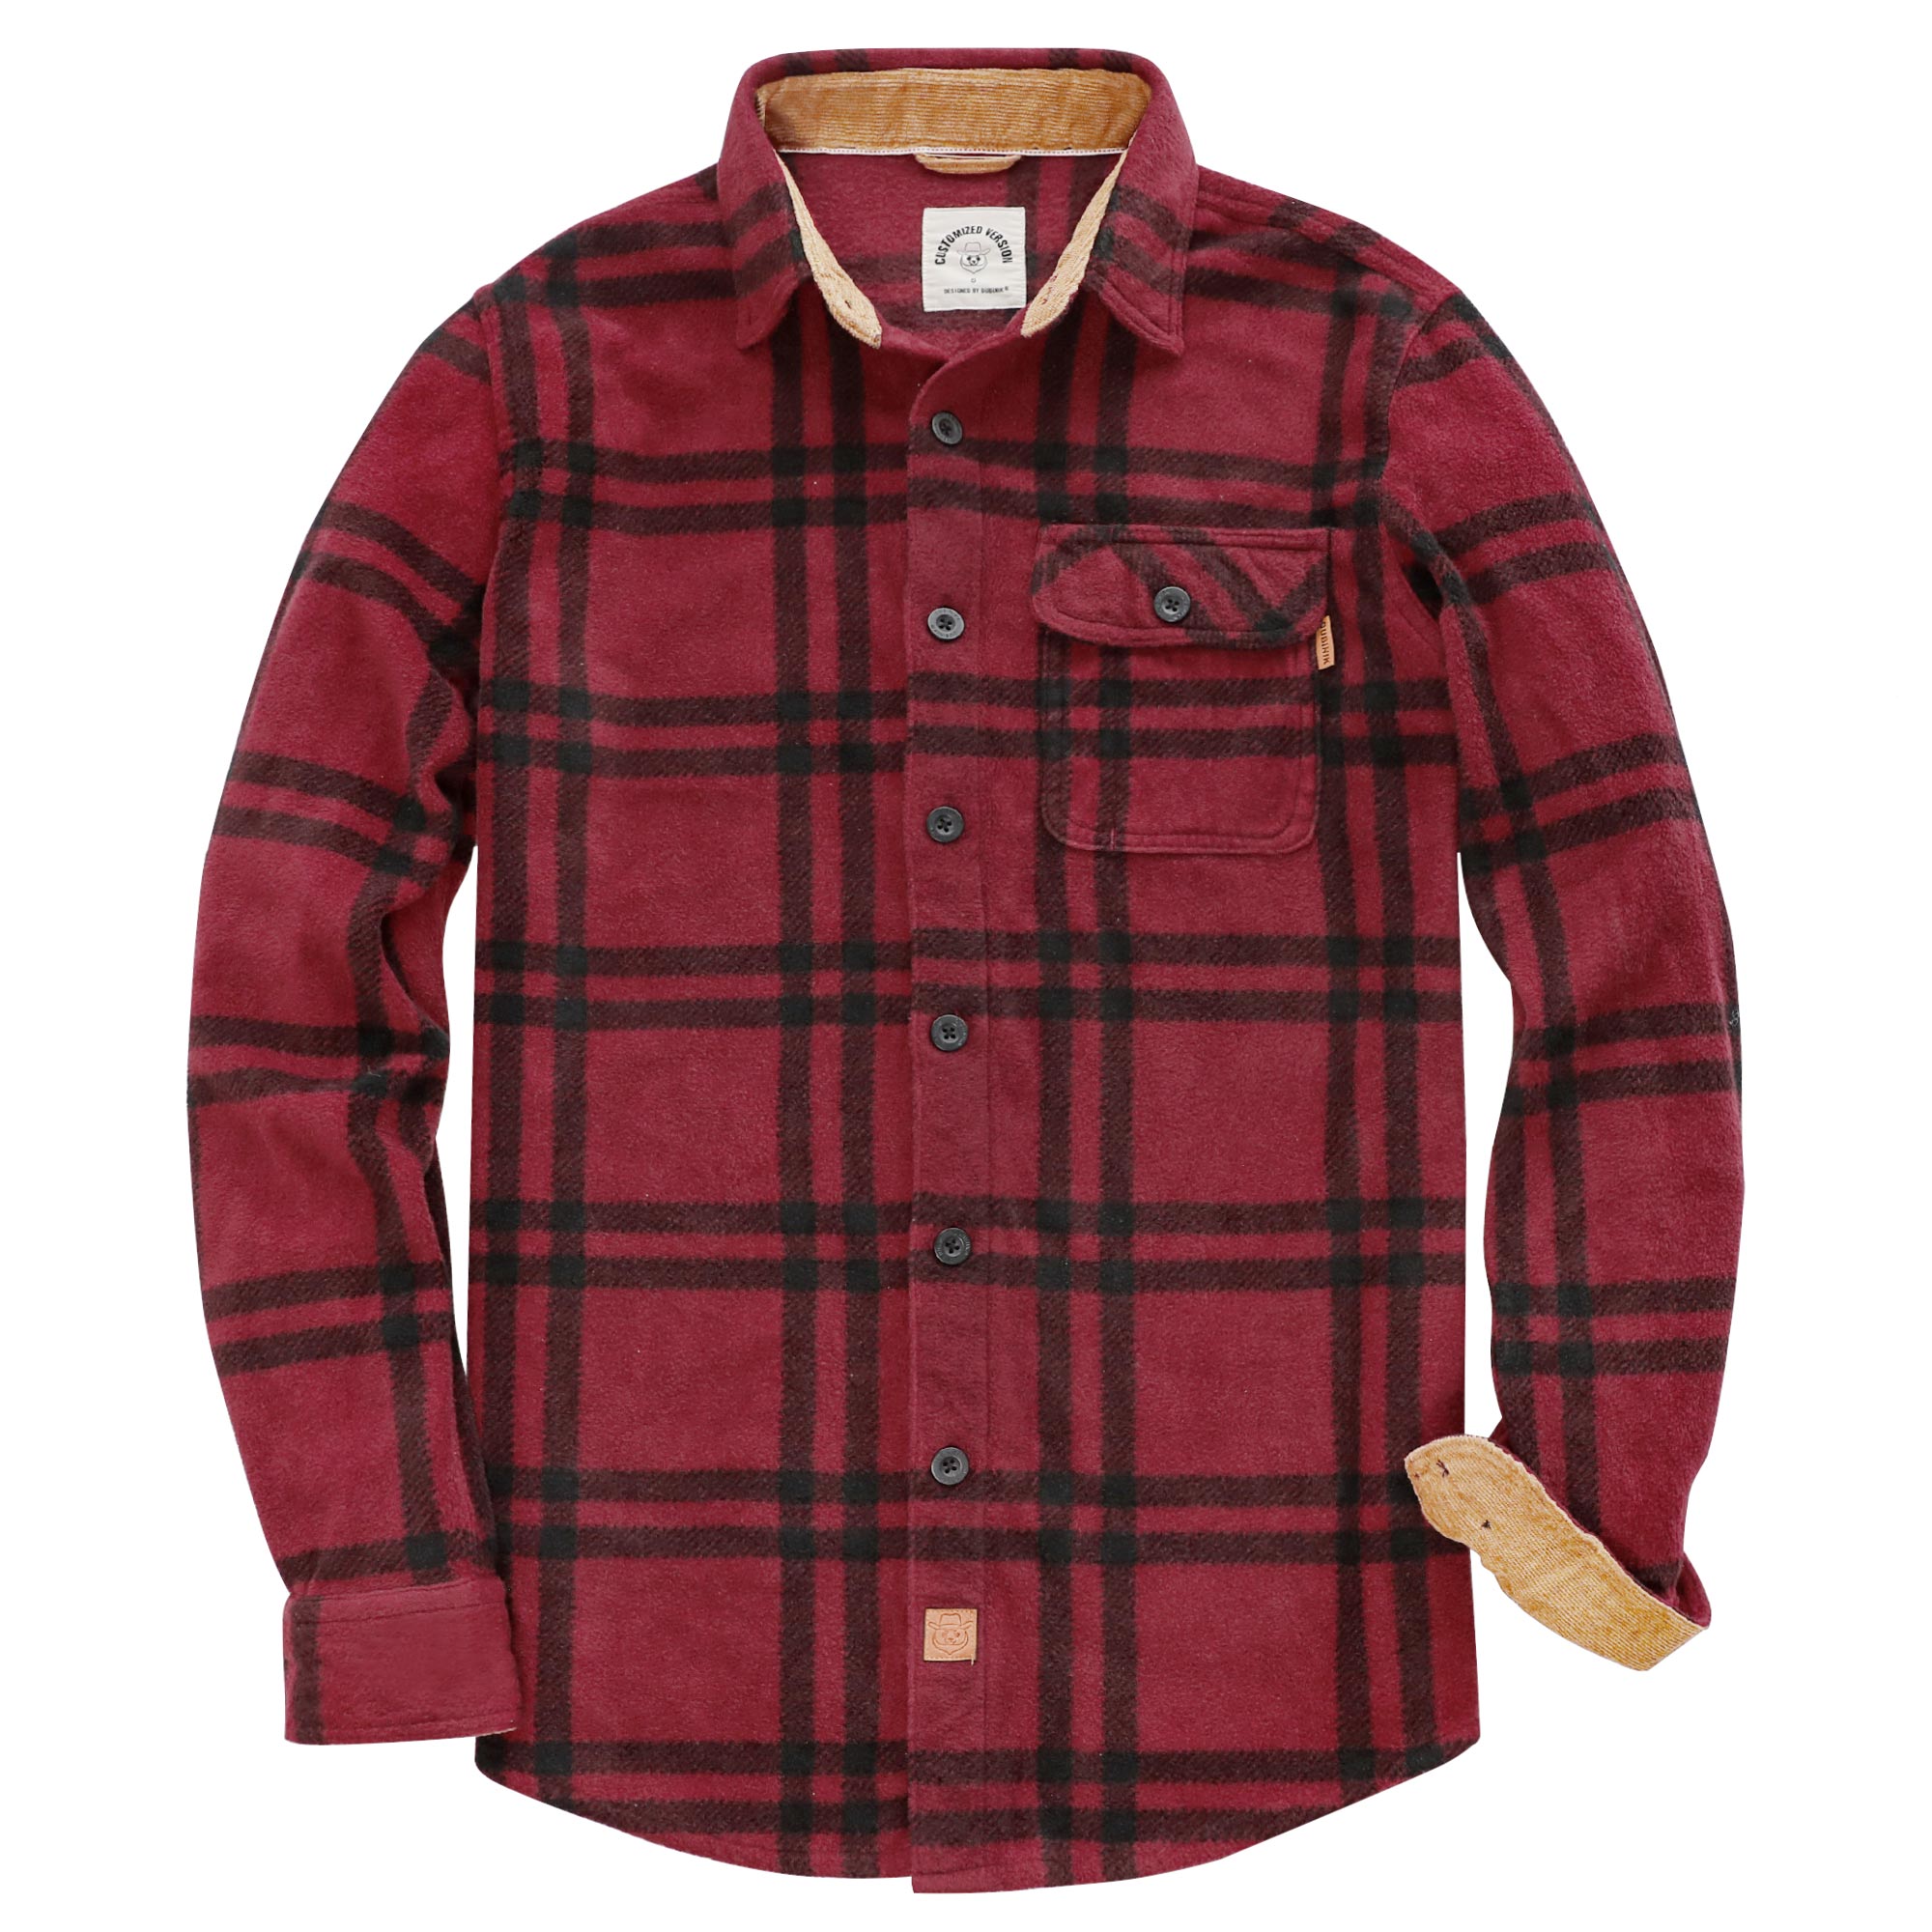 Mens Flannel Shirts Long Sleeve Flannel Shirt for Men Casual Button Down Brushed 100% Cotton Shirt #1818